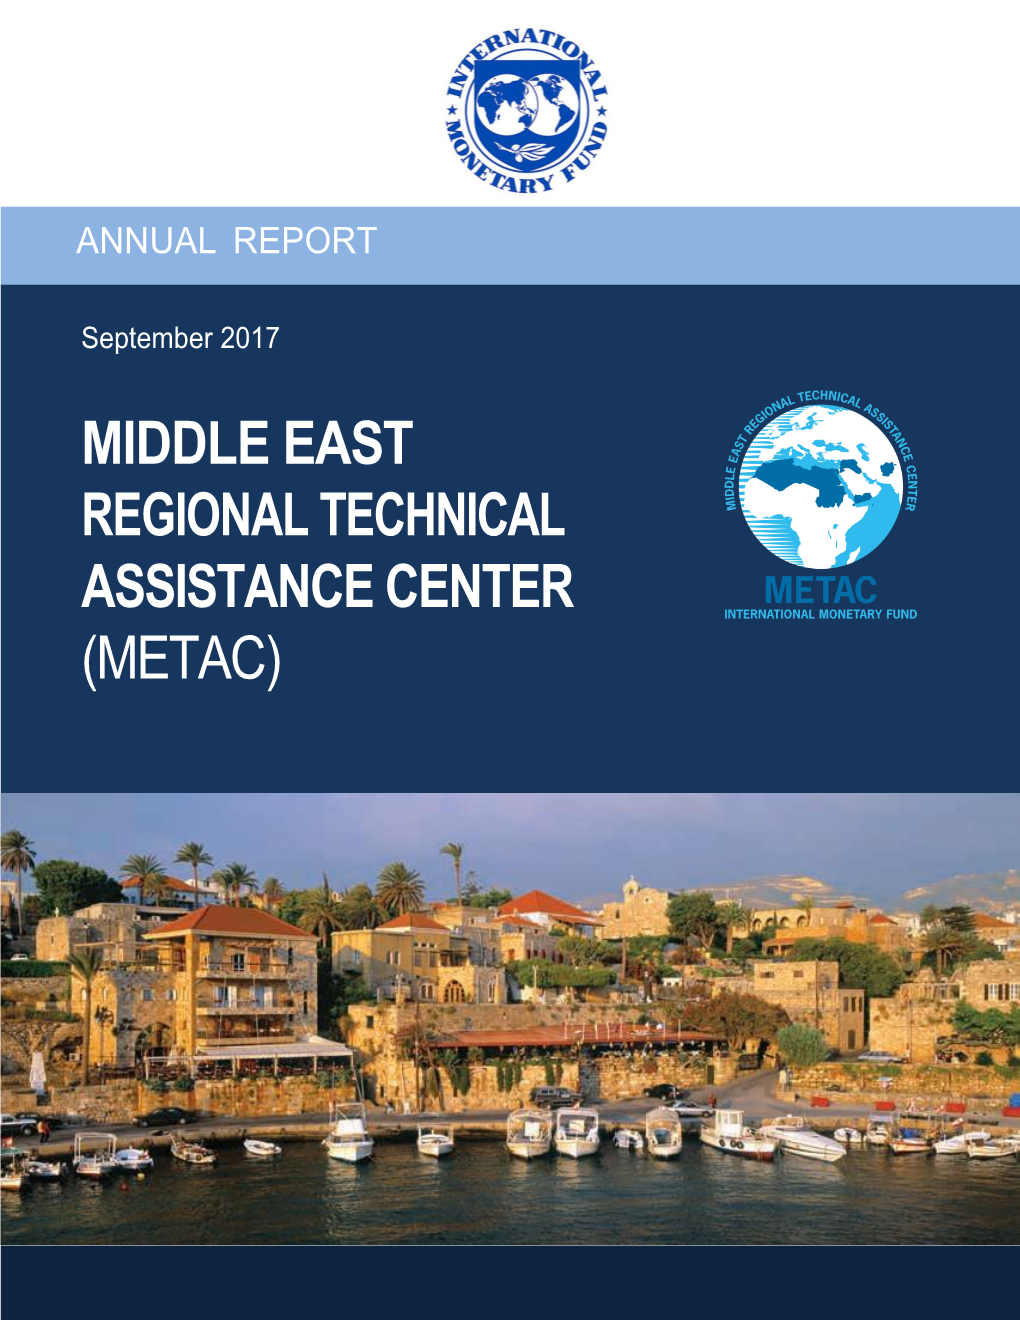 Middle East Regional Technical Assistance Center (Metac)